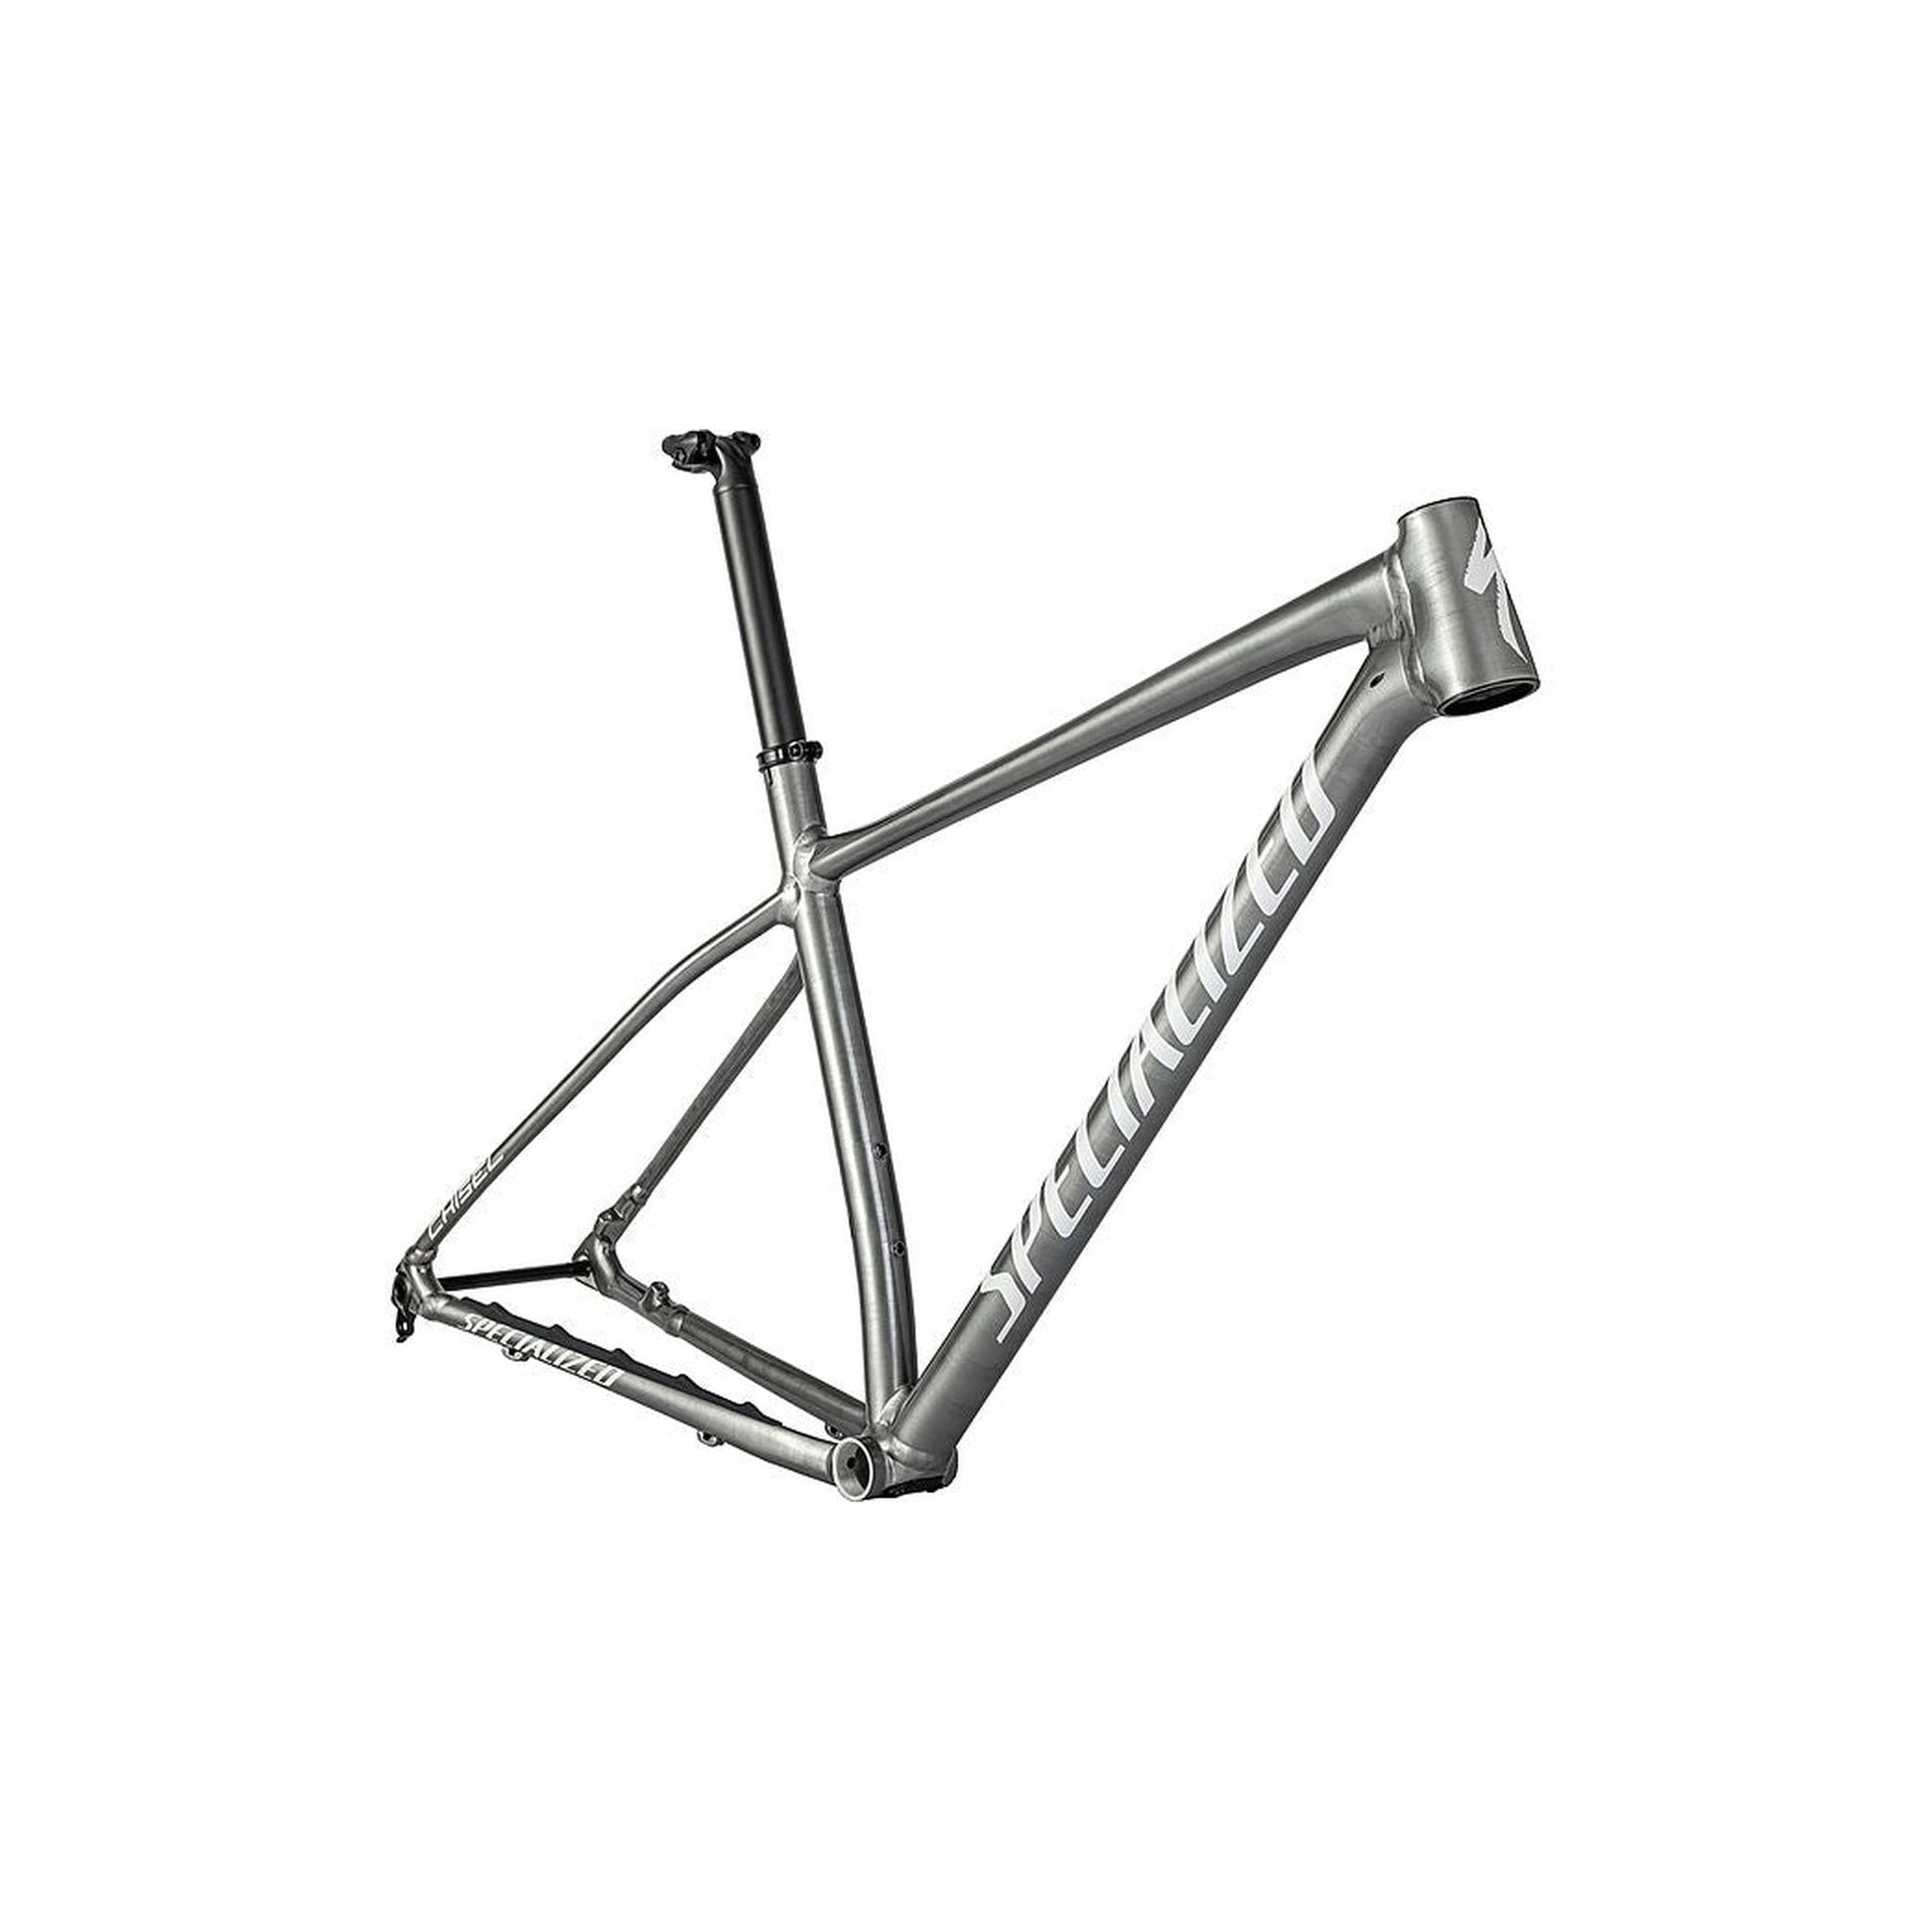 Chisel Frameset-Cycles Direct Specialized